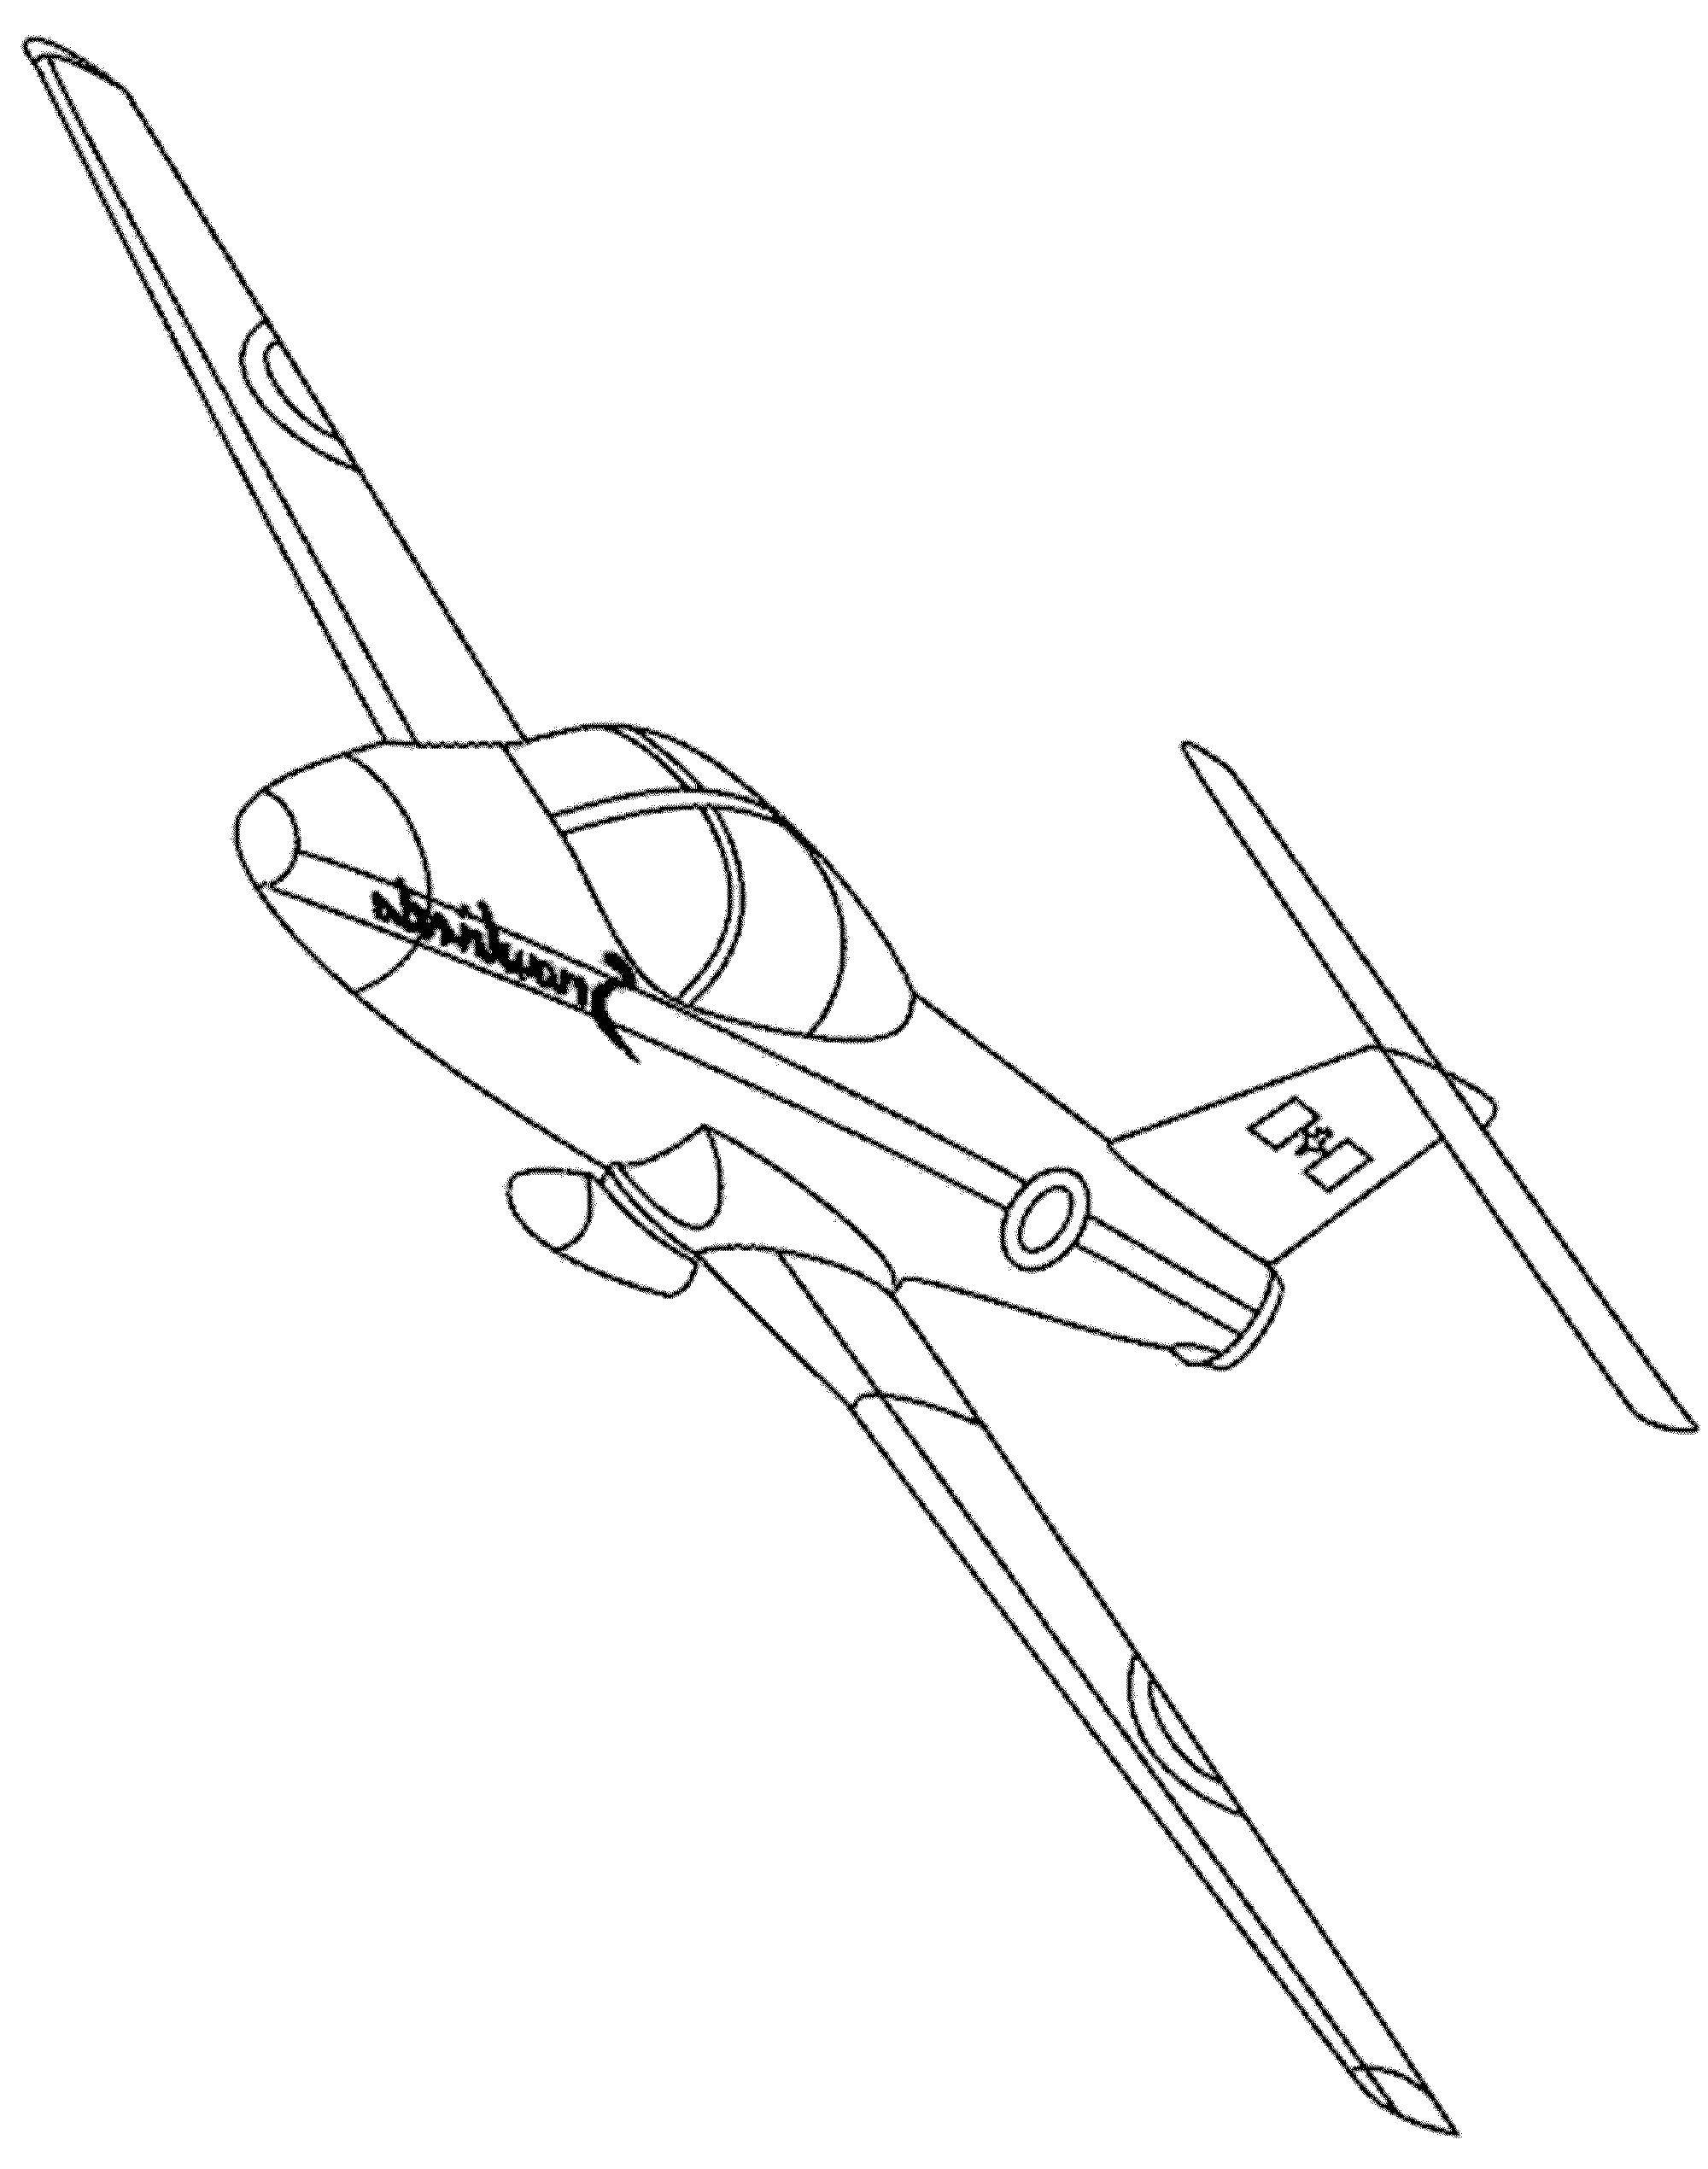 Coloring Fast aircraft. Category The planes. Tags:  Plane.